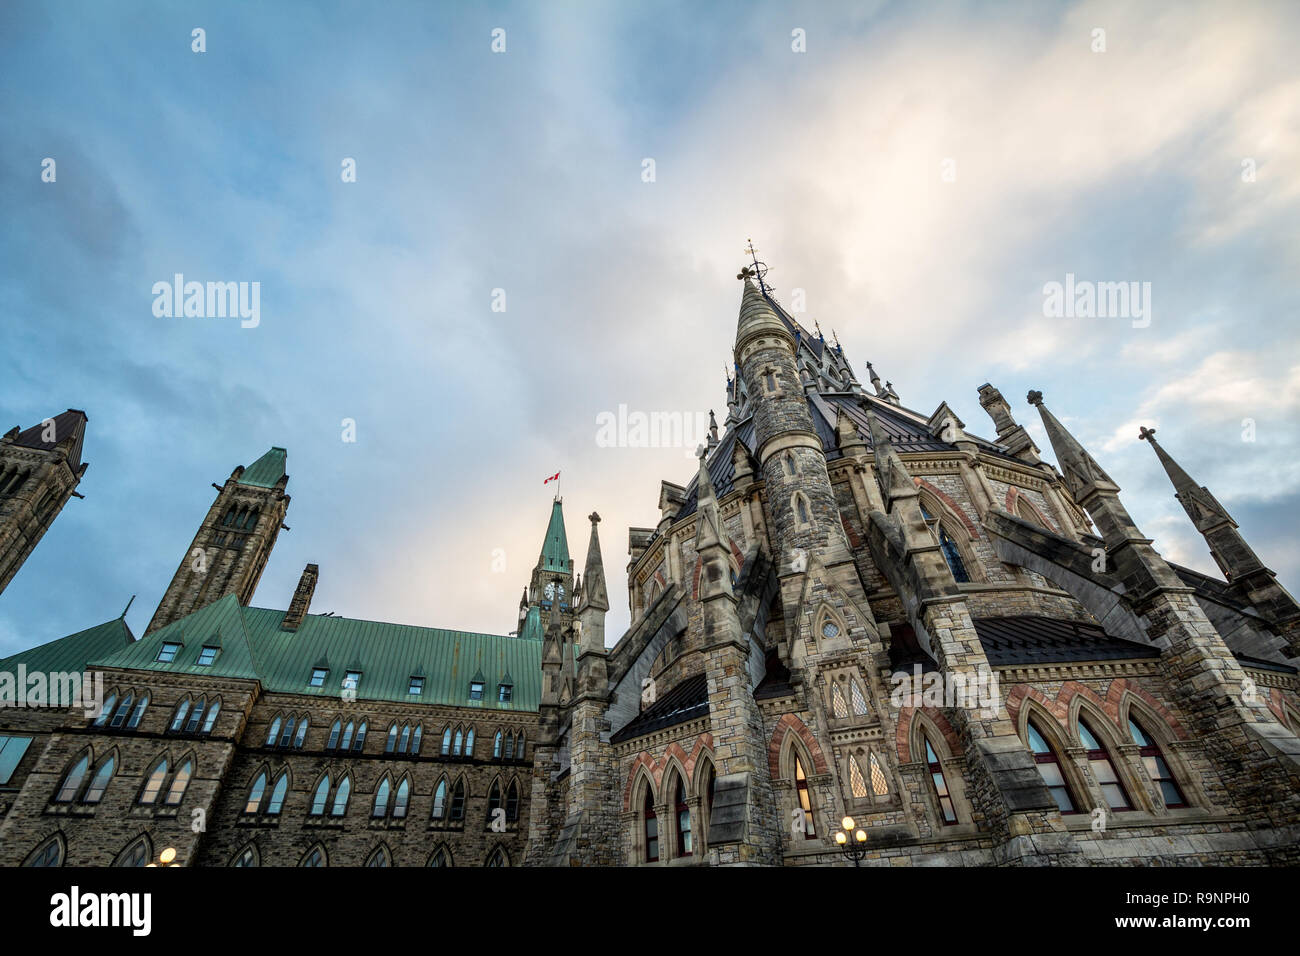 Main building of the center block of the Parliament of Canada, in the Canadian Parliamentary complex of Ottawa, Ontario. It is a major kandmark,  cont Stock Photo